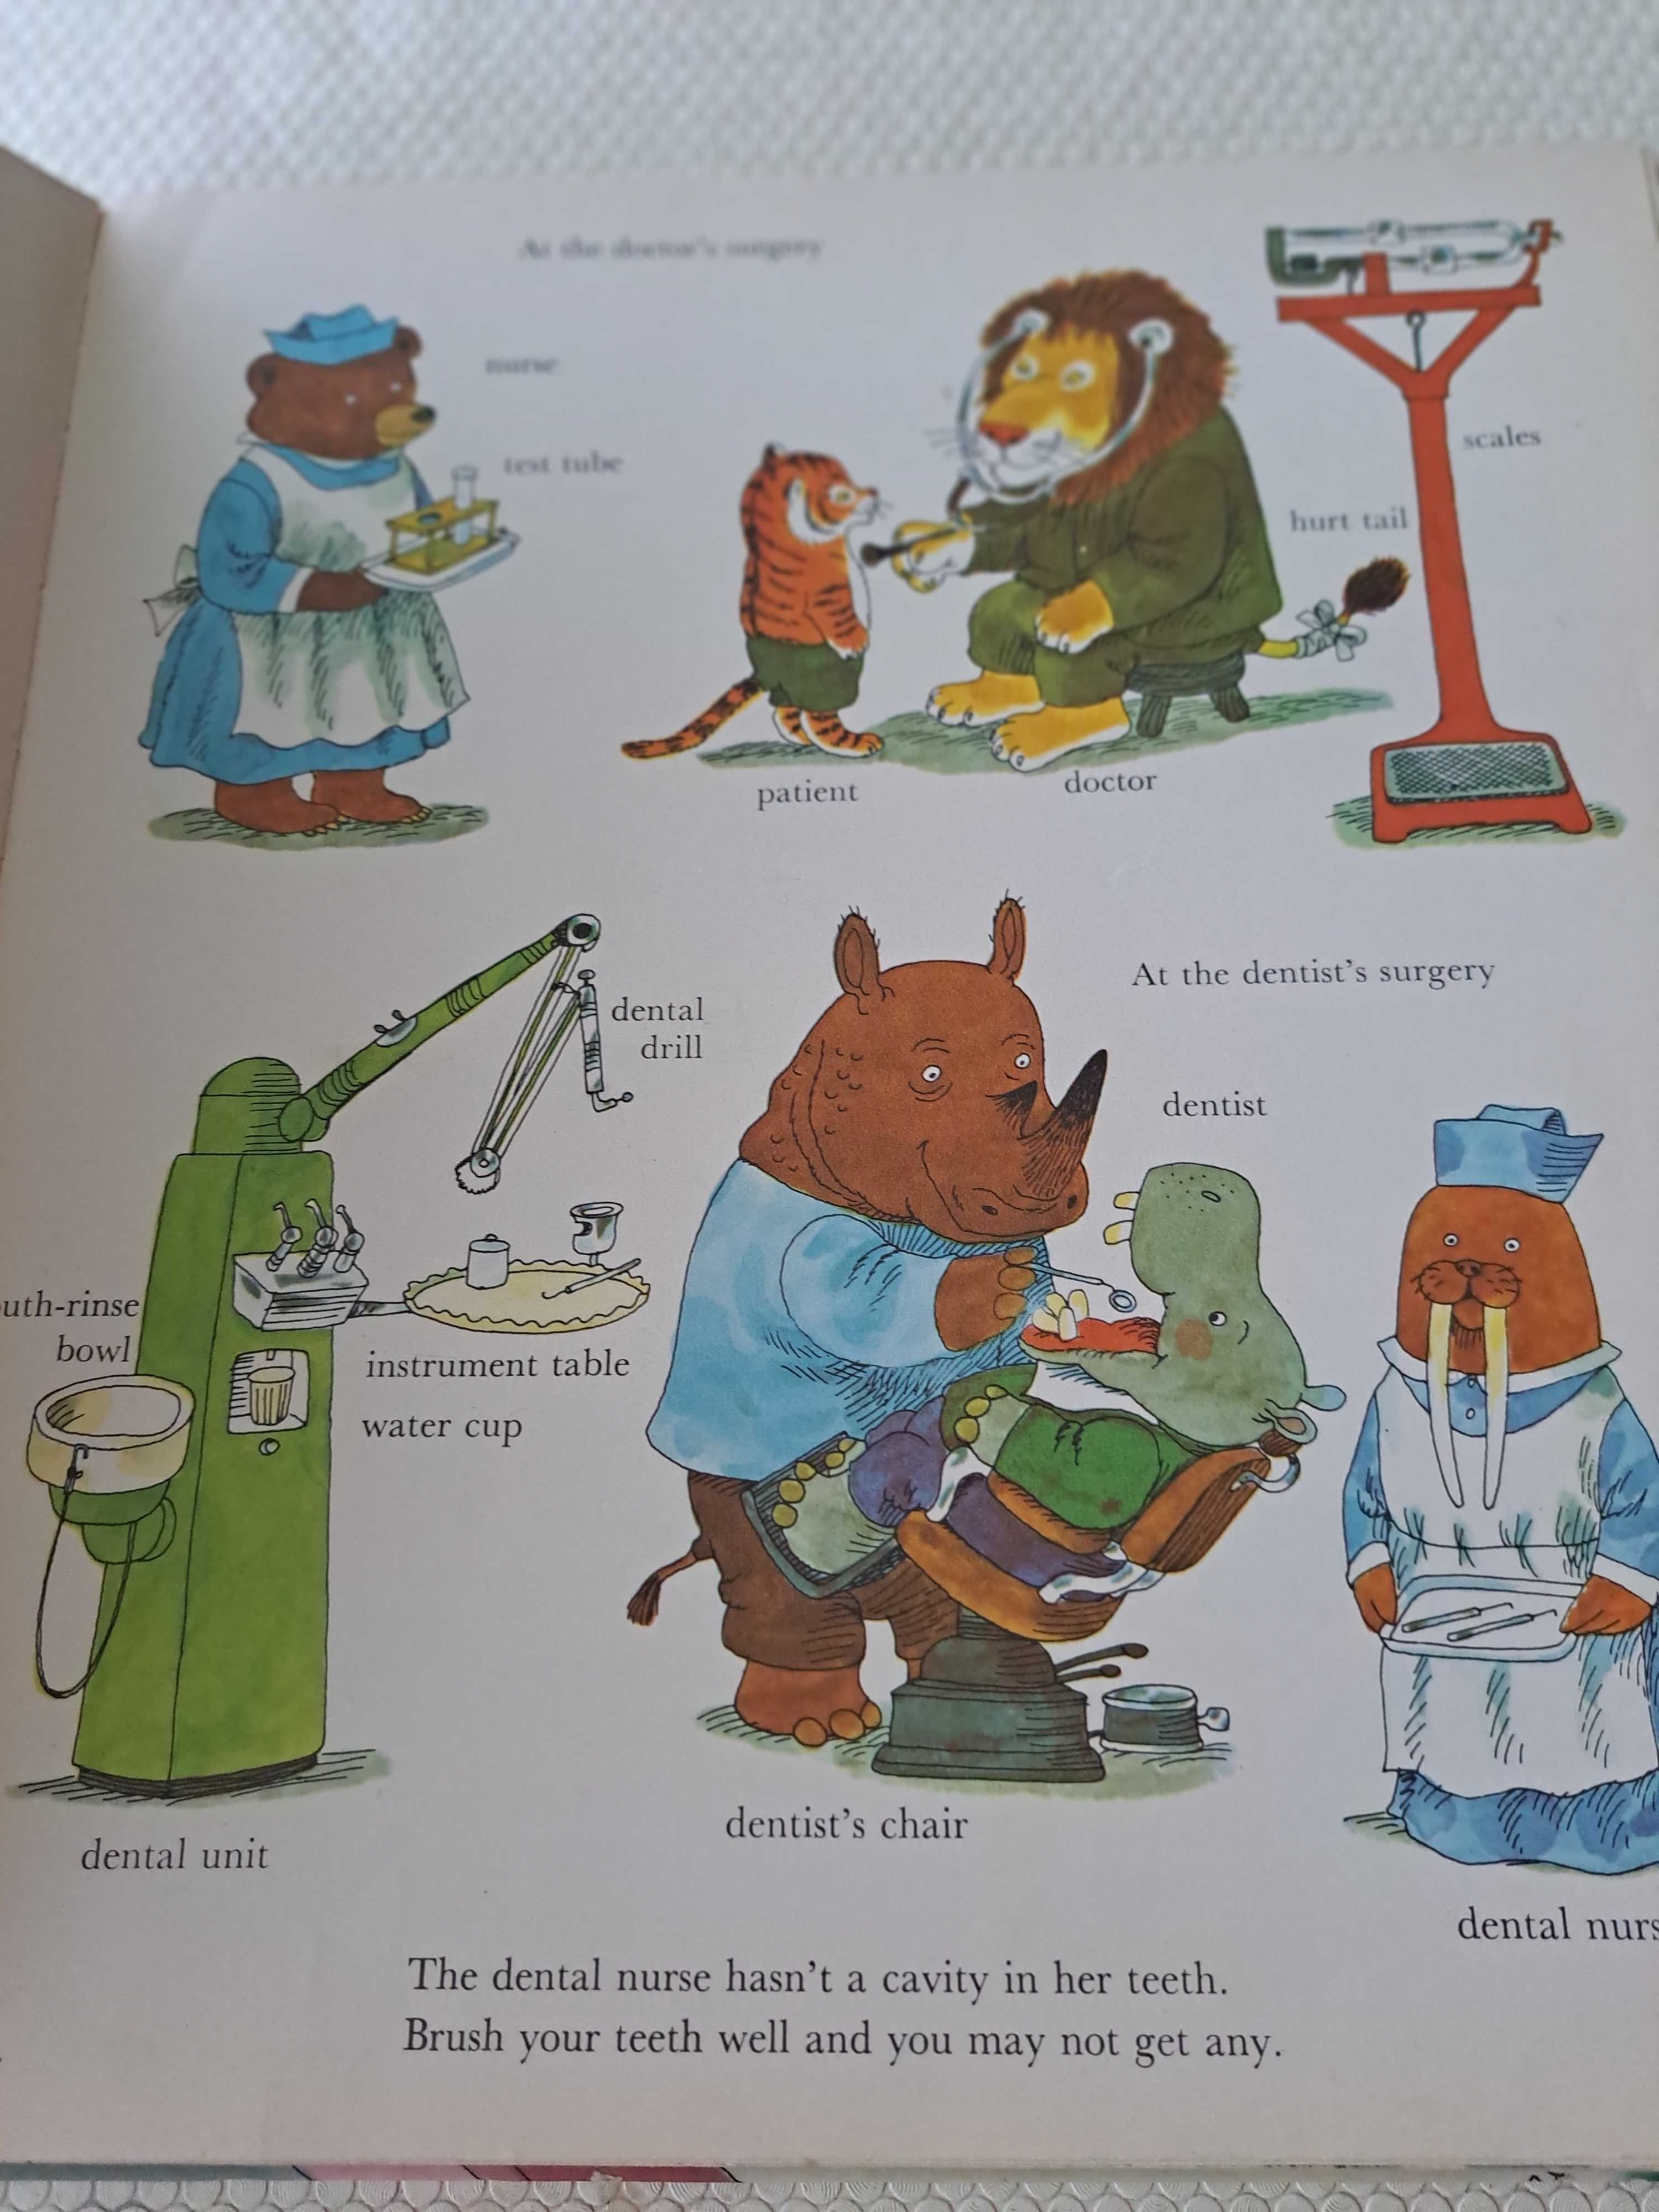 Best Word Book Ever - Richard Scarry (1966)